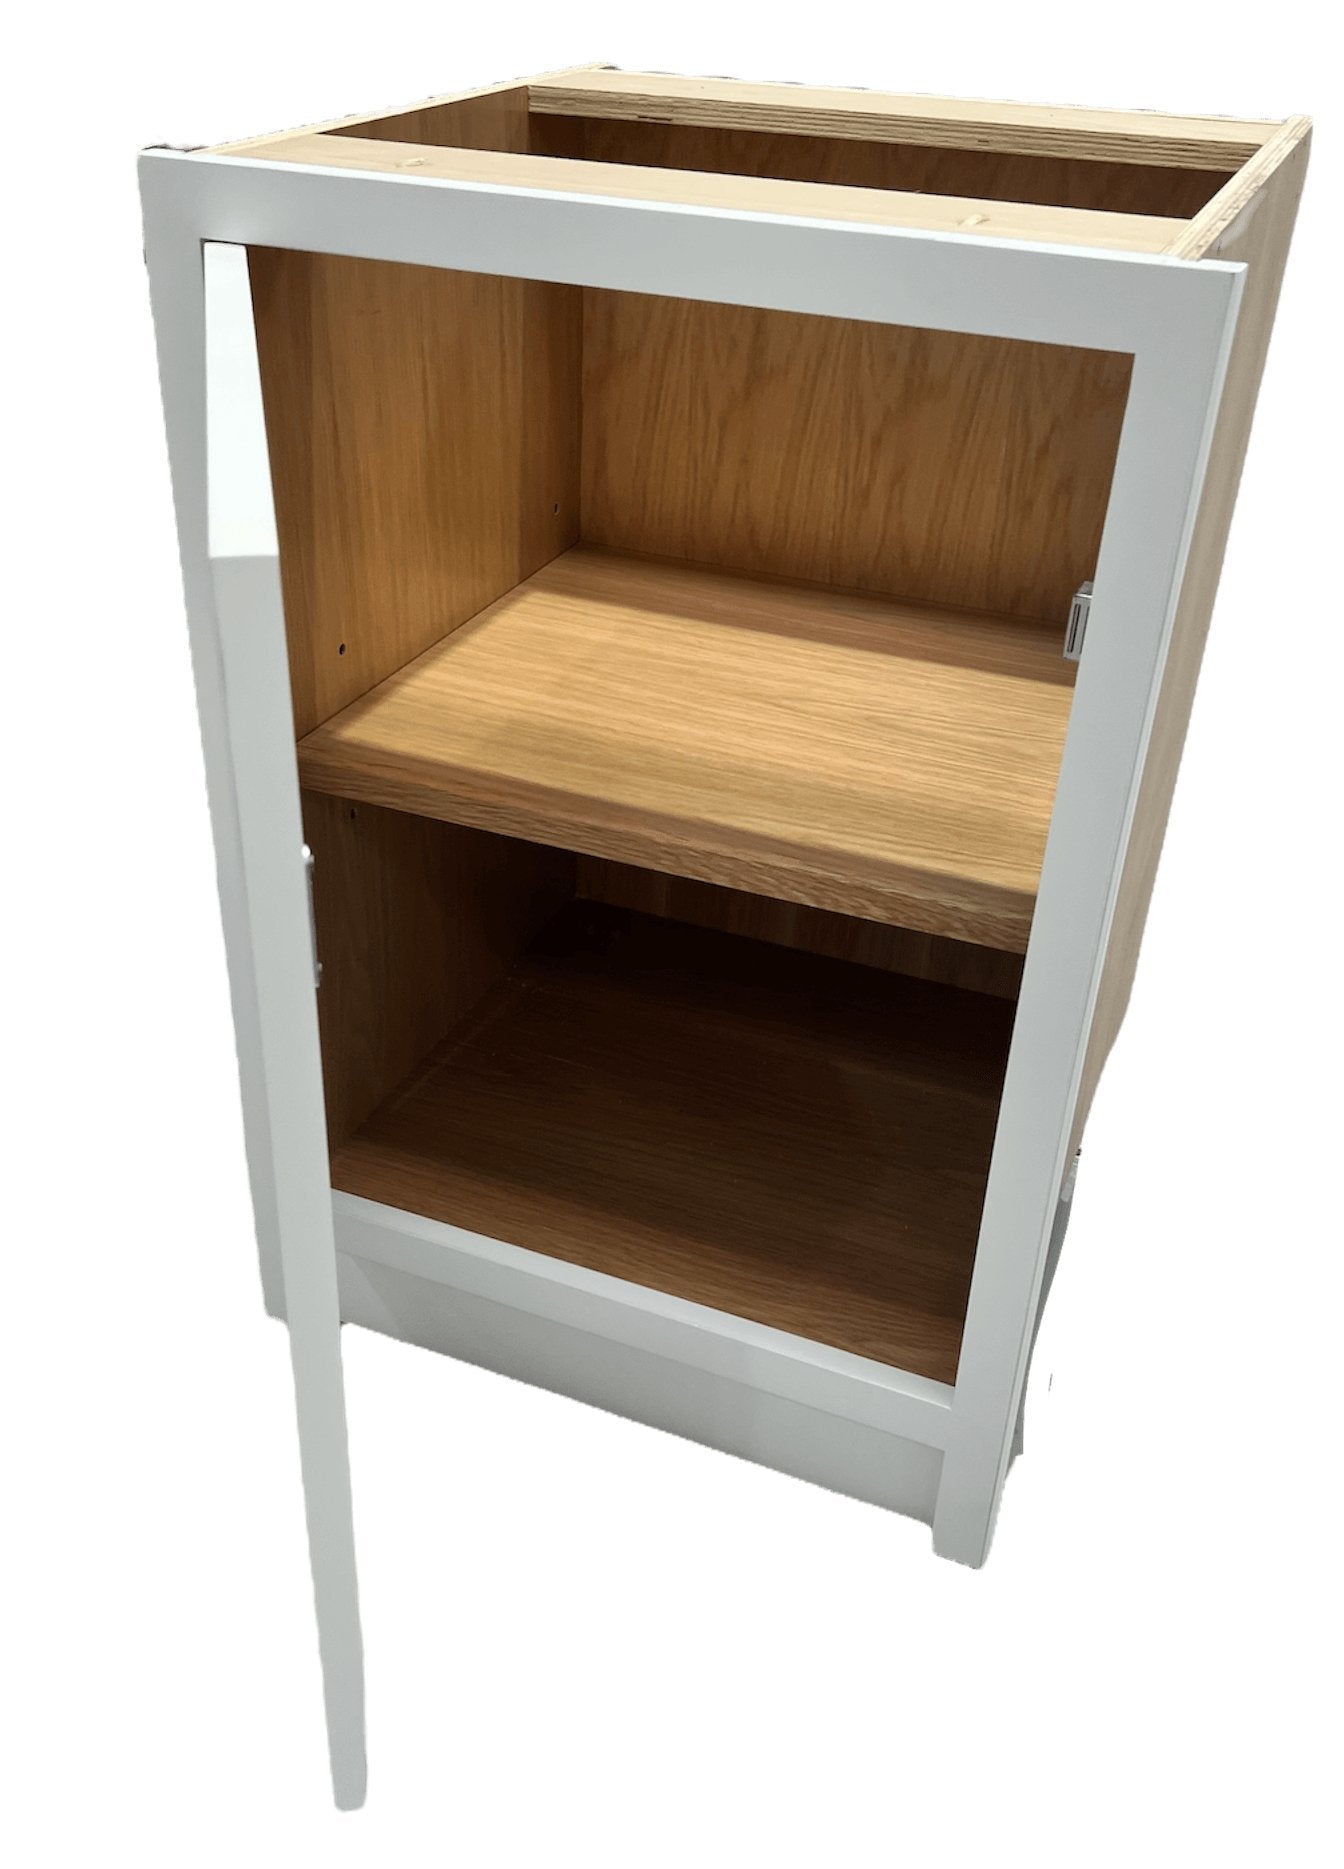 BH 500 - 500mm Highline single door base unit - Classic Kitchens Direct